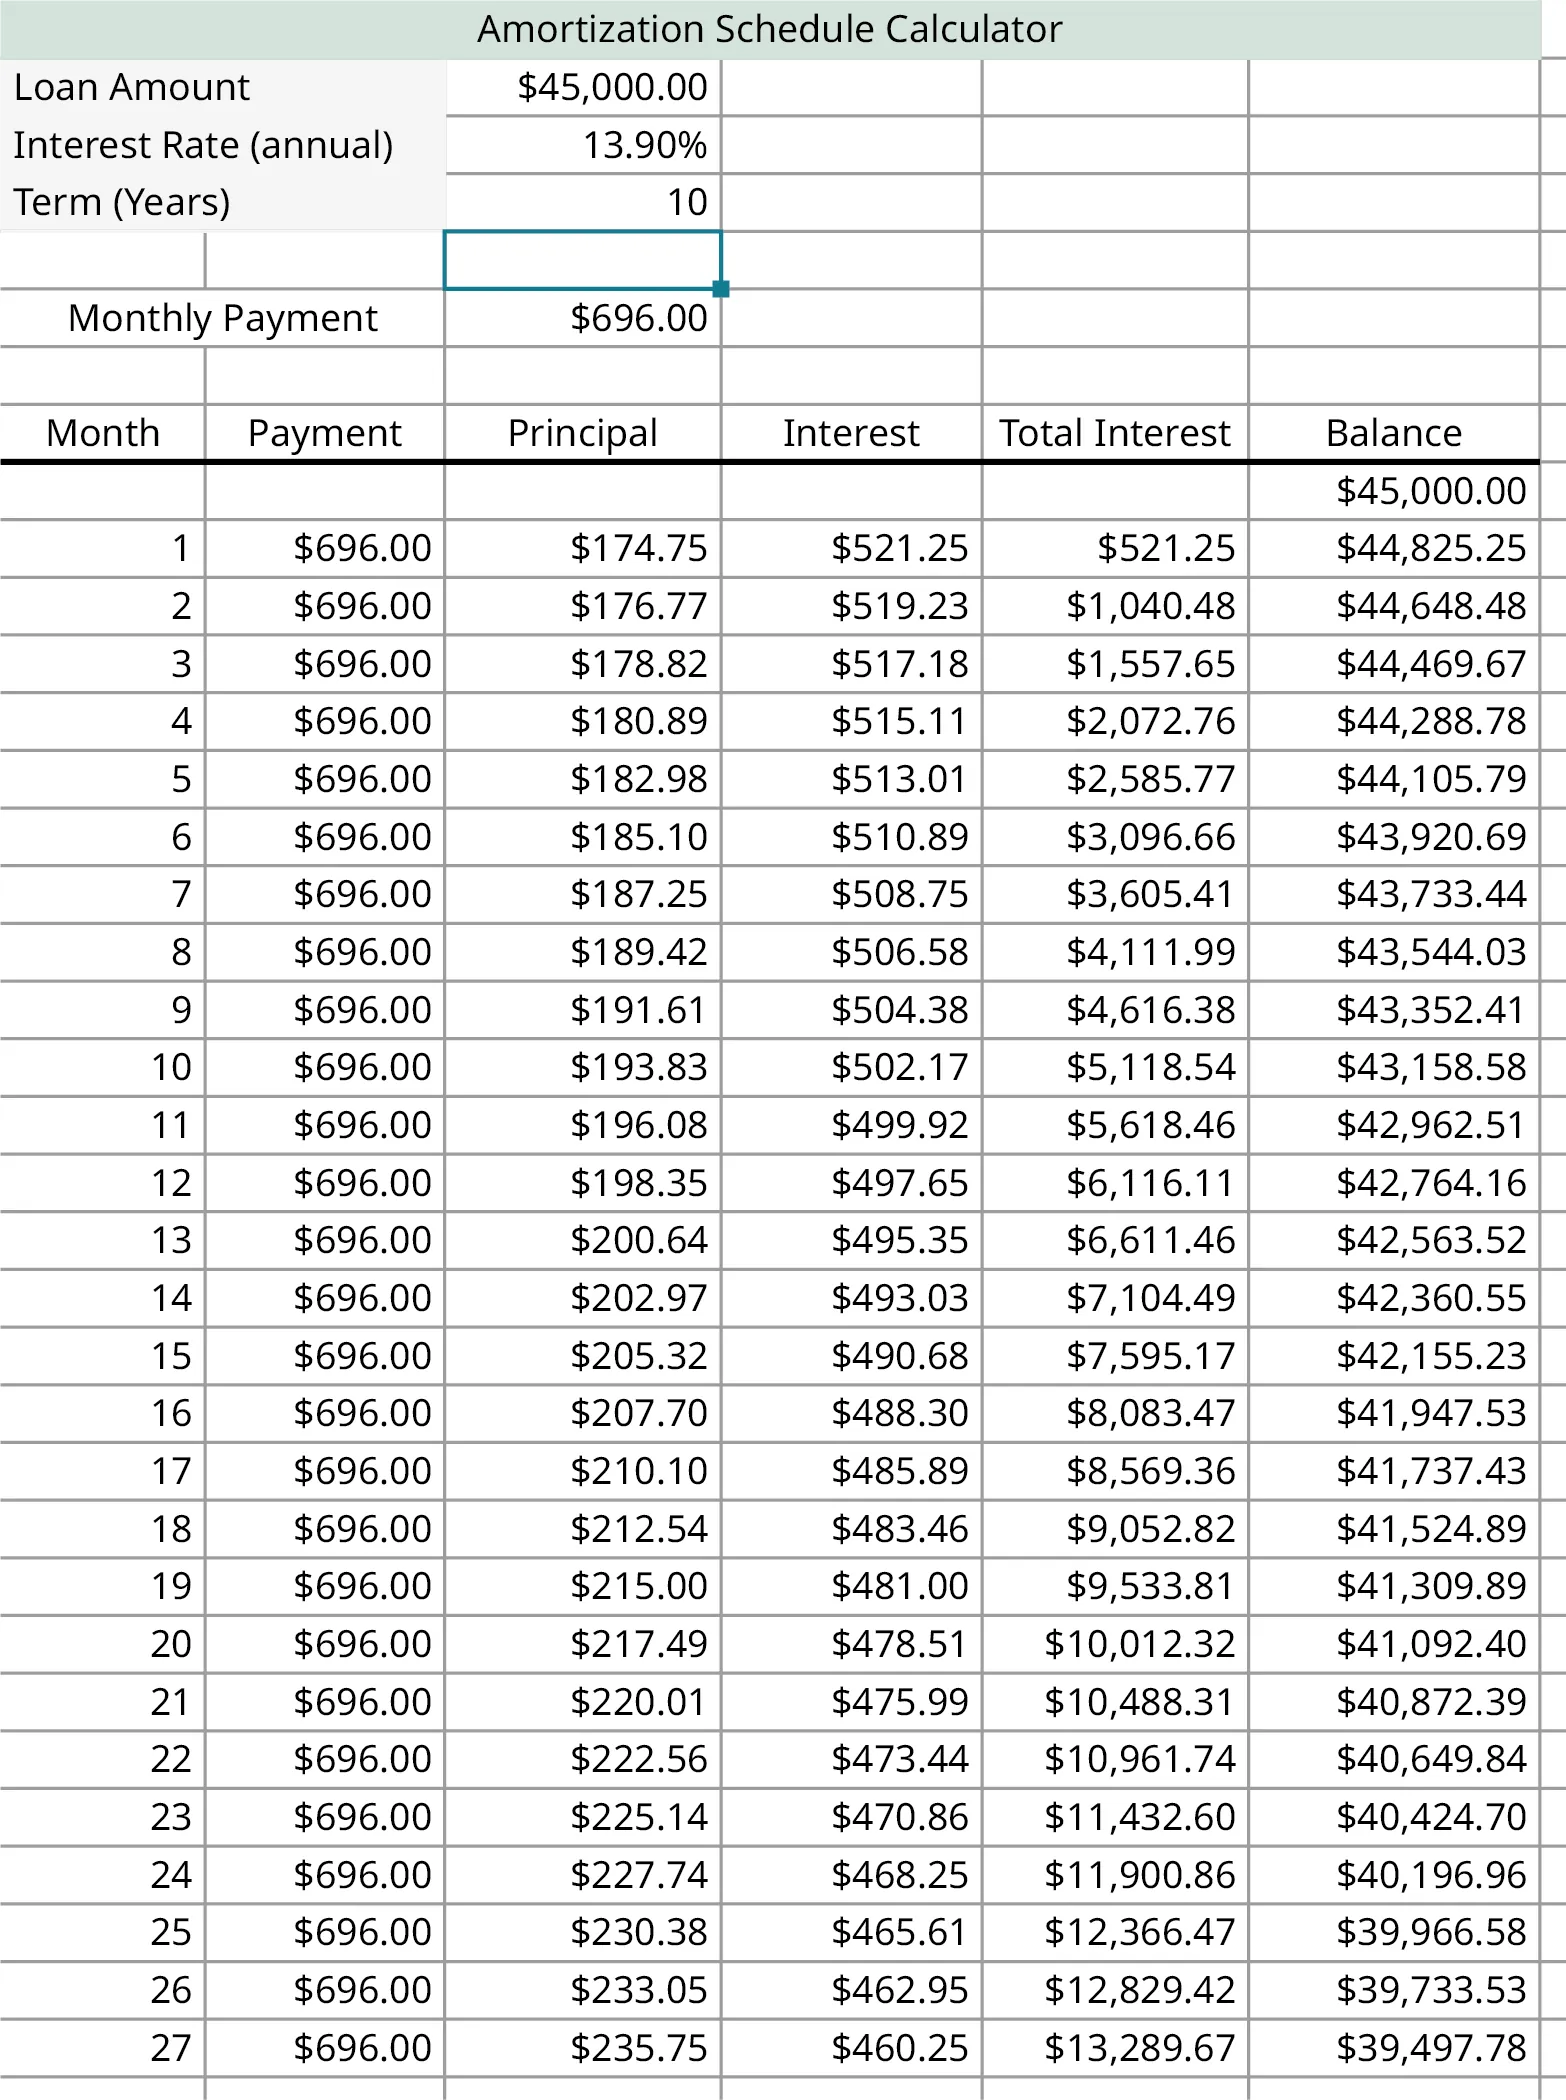 A spreadsheet labeled as amortization schedule calculator. The sheet calculates the repayment for the loan amount of $45,000.00 for an interest rate of 13.90 percent annually and the monthly payment is $696.00 over 10 years. The factors include calculations such as month, payment, principal, interest, total, and interest and balance.